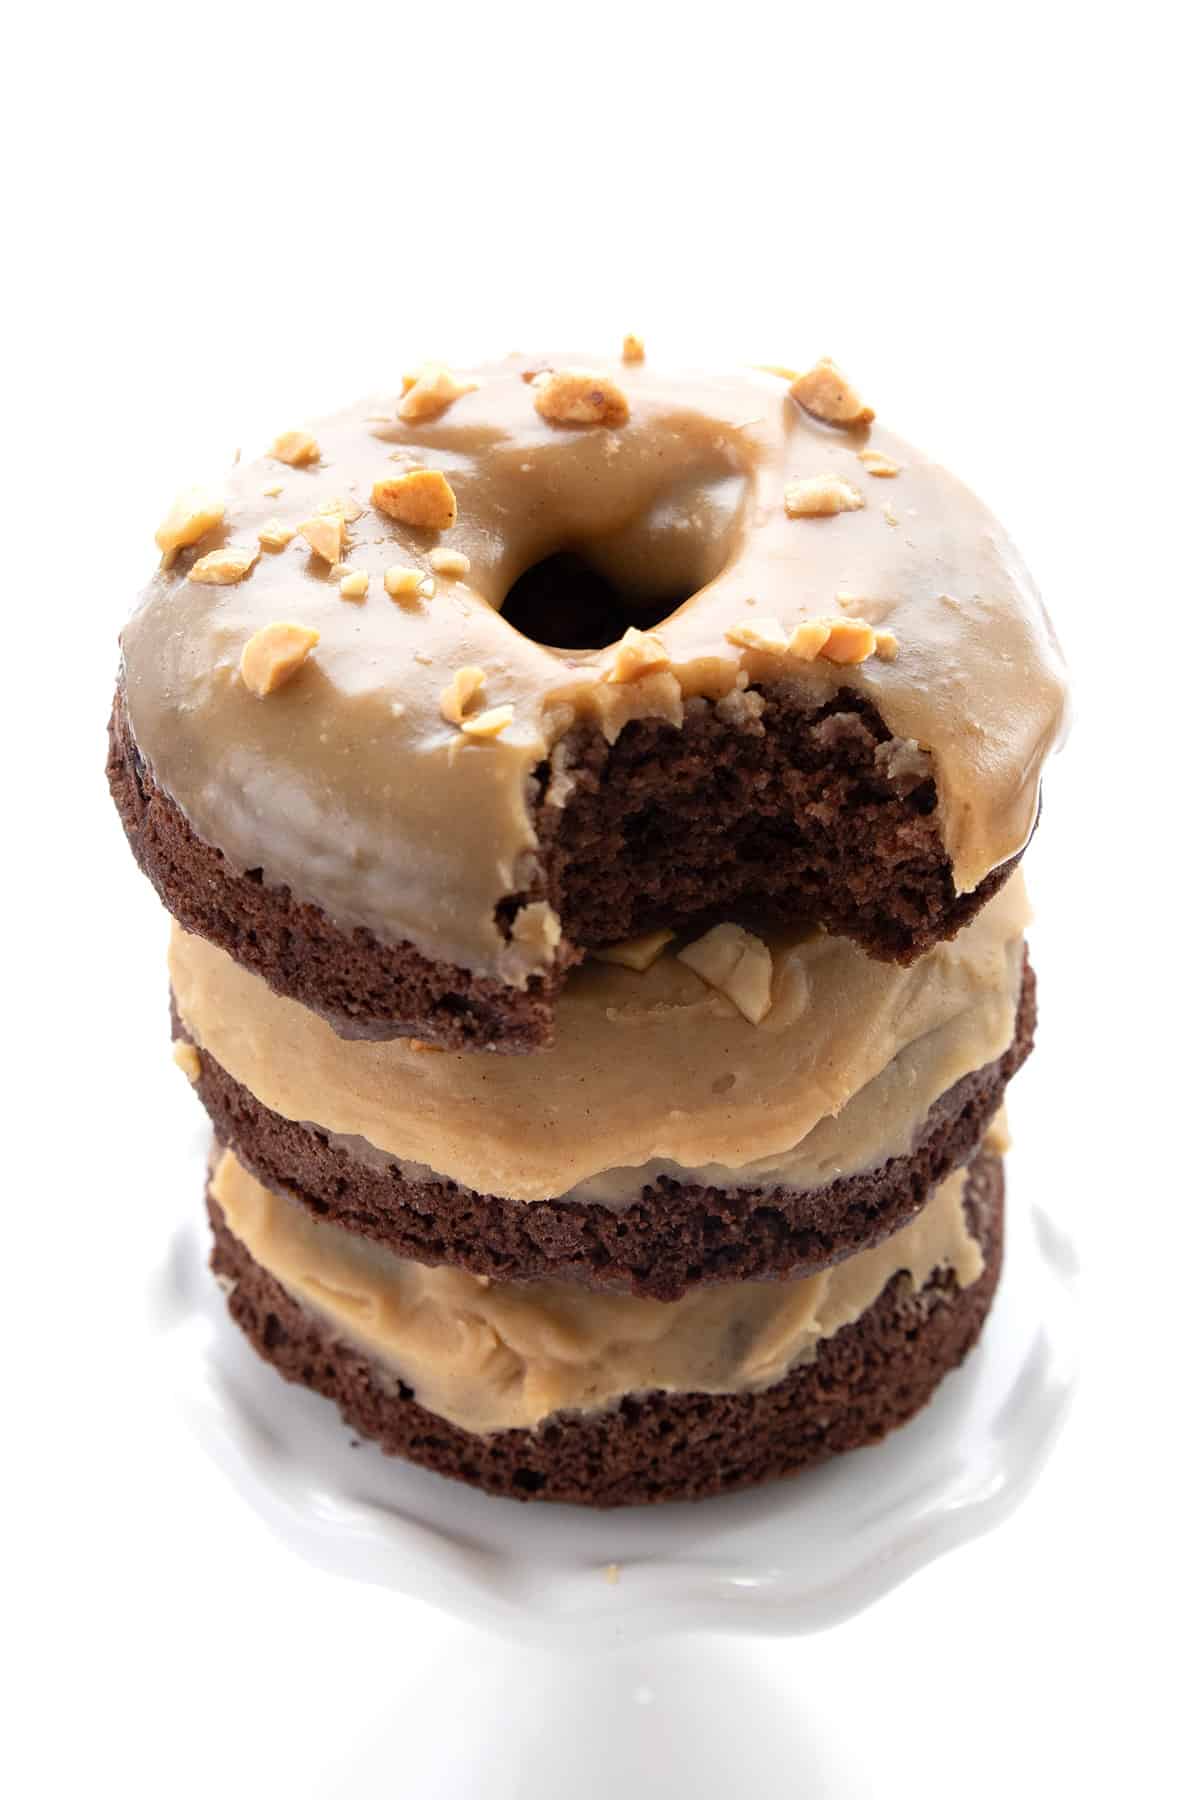 A stack of Keto Chocolate Peanut Butter Donuts on a white cupcake stand, with a bite taken out of the top one.